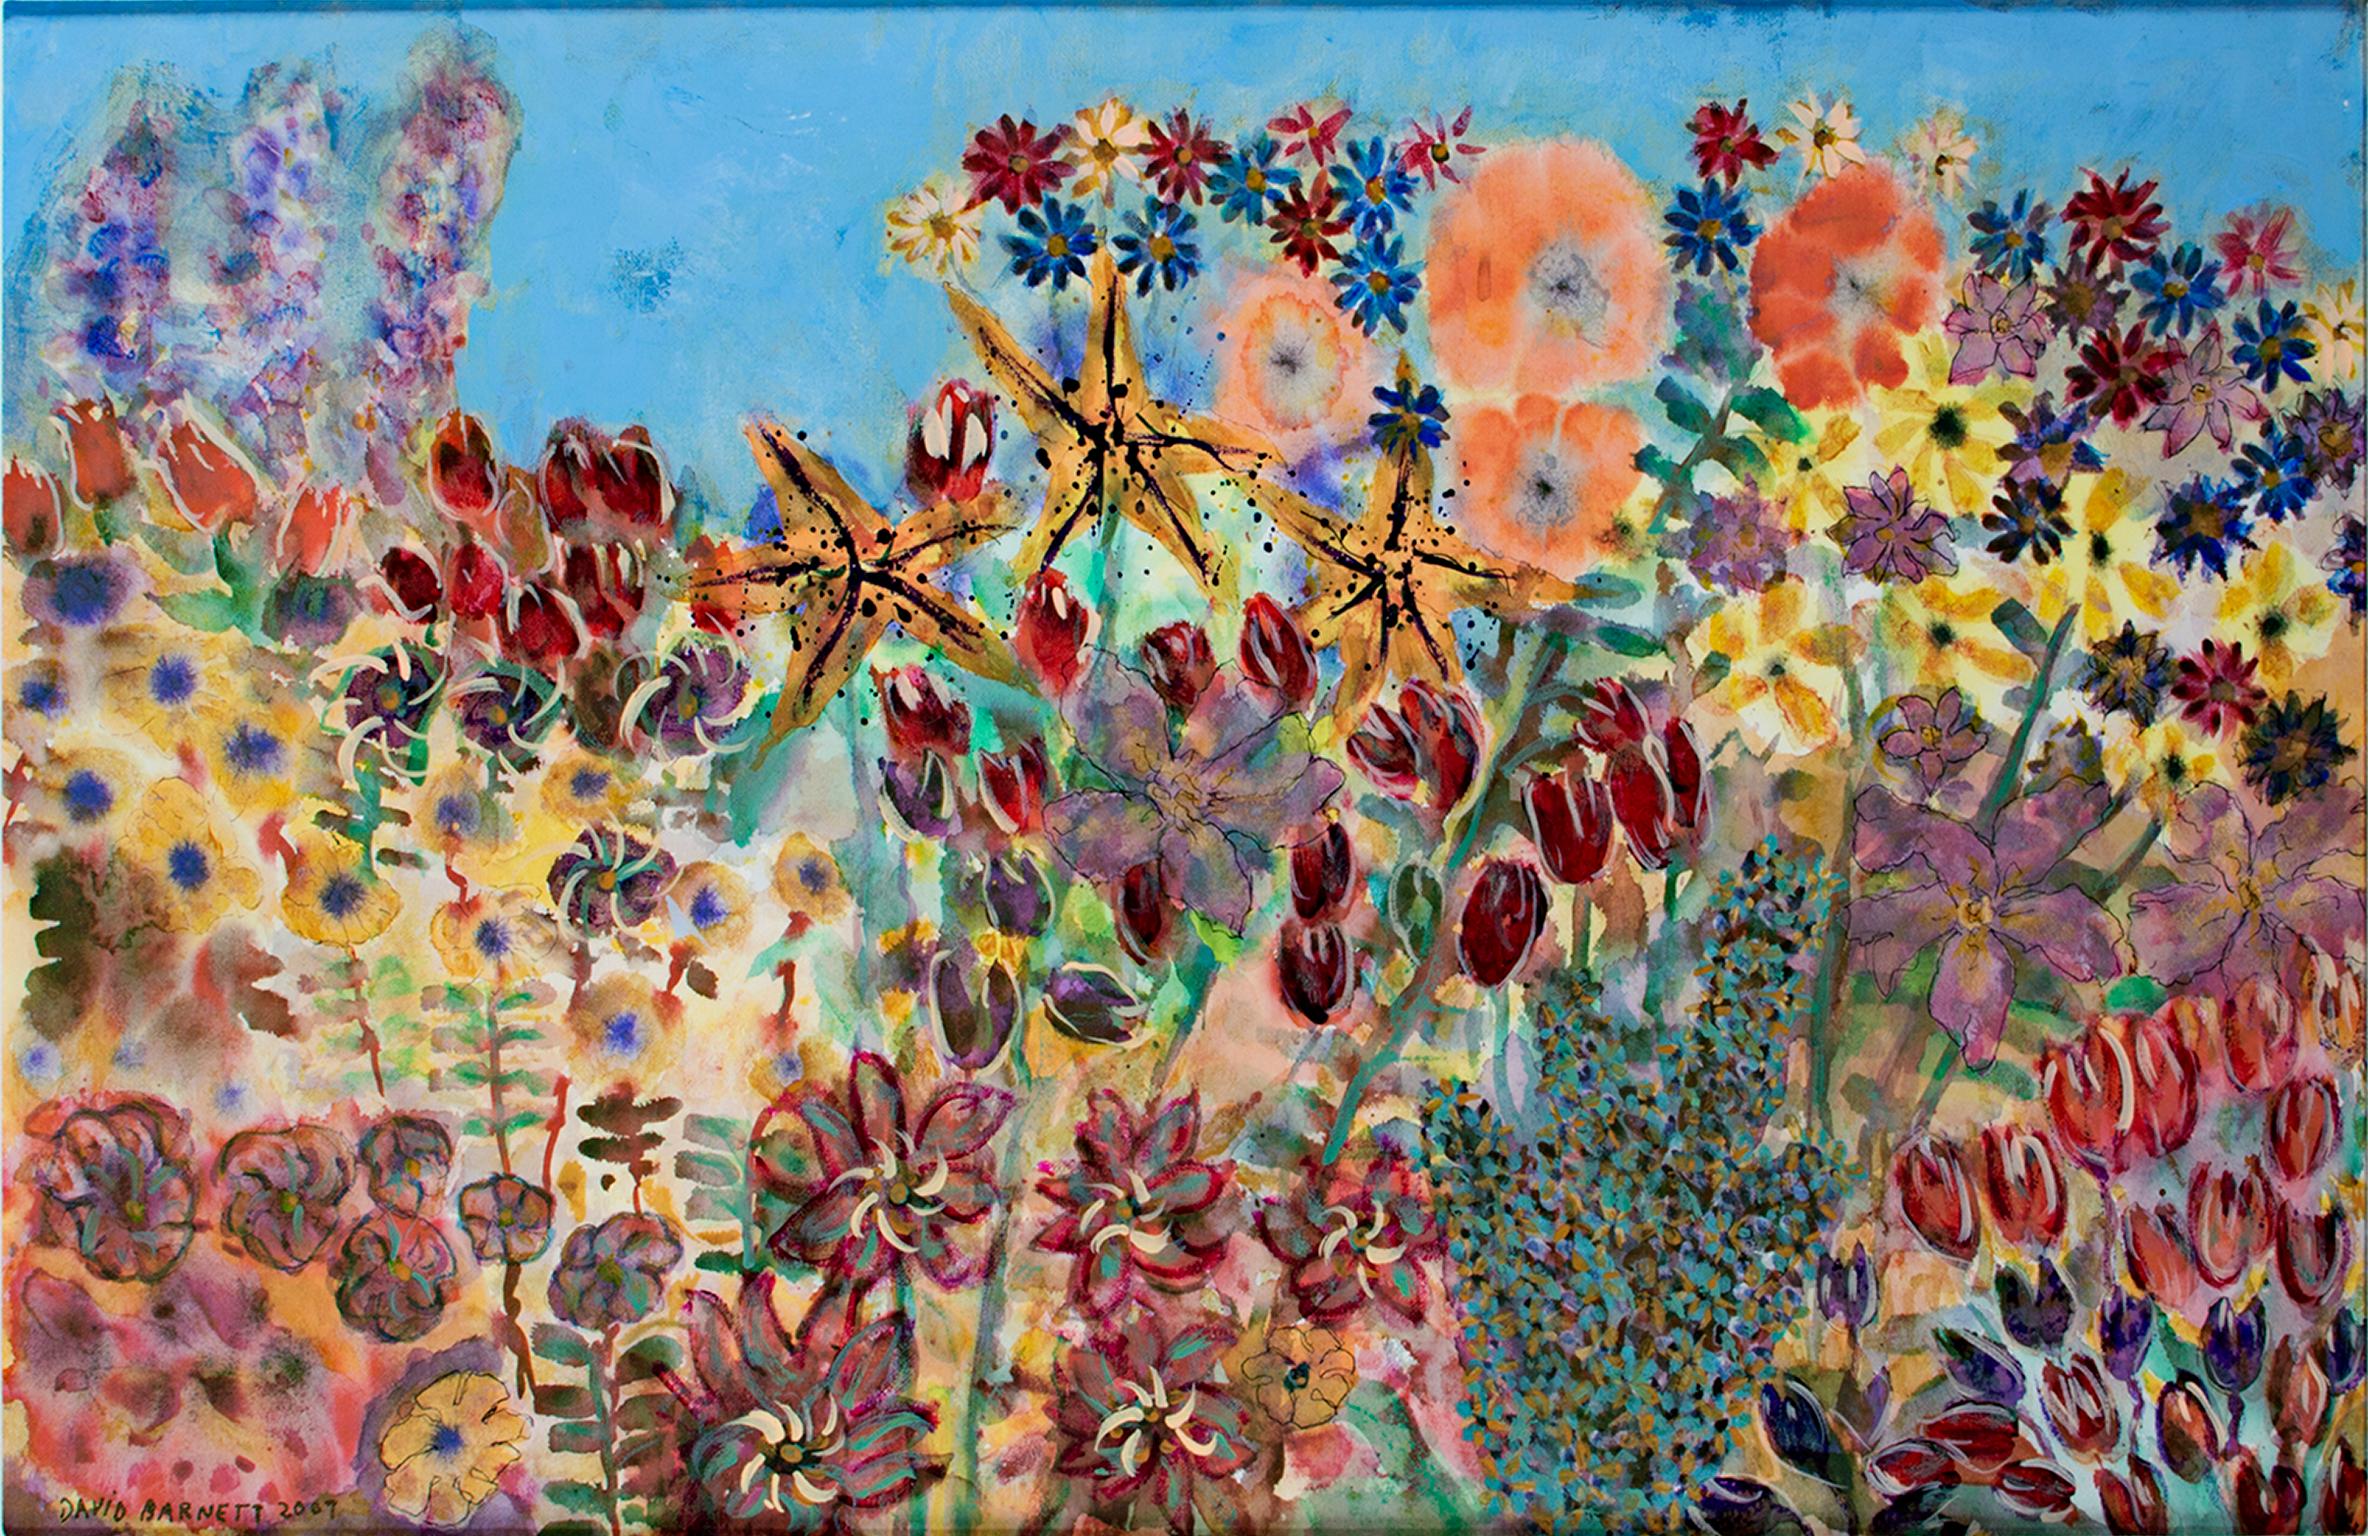 "Think Spring" is a mixed media & acrylic piece by David Barnett, signed and dated in the lower left. The piece is an explosion of color and texture with many different types of flowers against a rich blue sky.

Art size: 18" x 28 1/4"
Frame size: